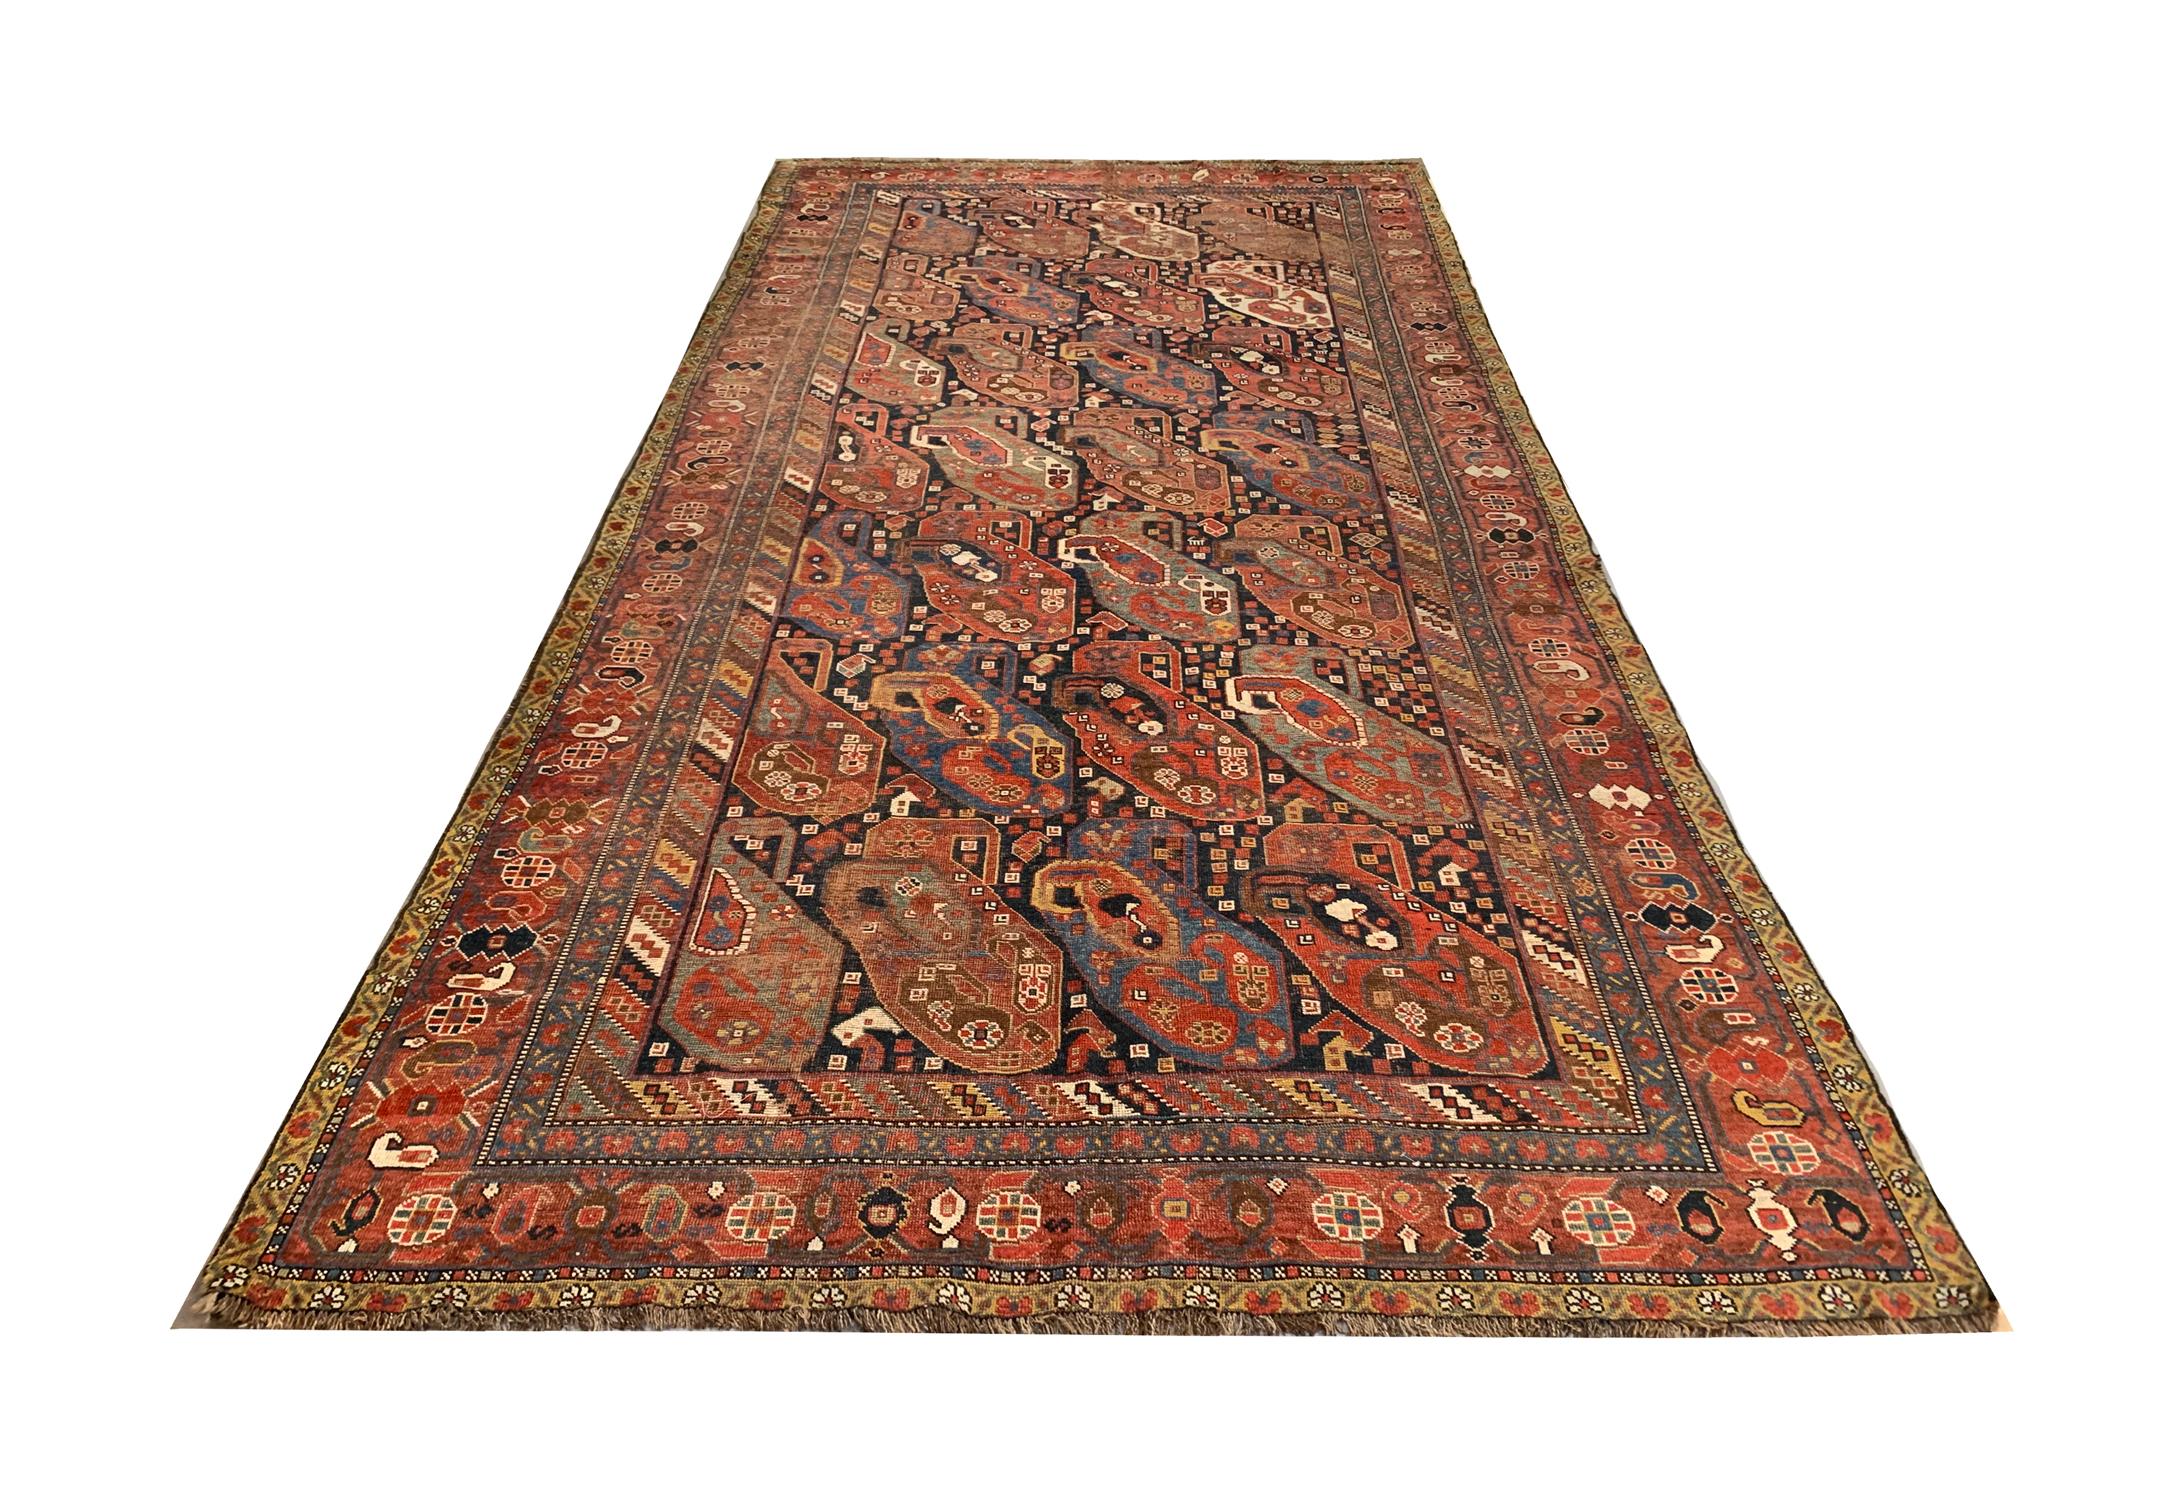 Are you looking for an antique piece to spice up your interior? This fine Caucasian wool rug is the perfect accent accessory for both classic and traditional homes. This elegant rug style is popular within Oriental Rug Shops due to the high demand